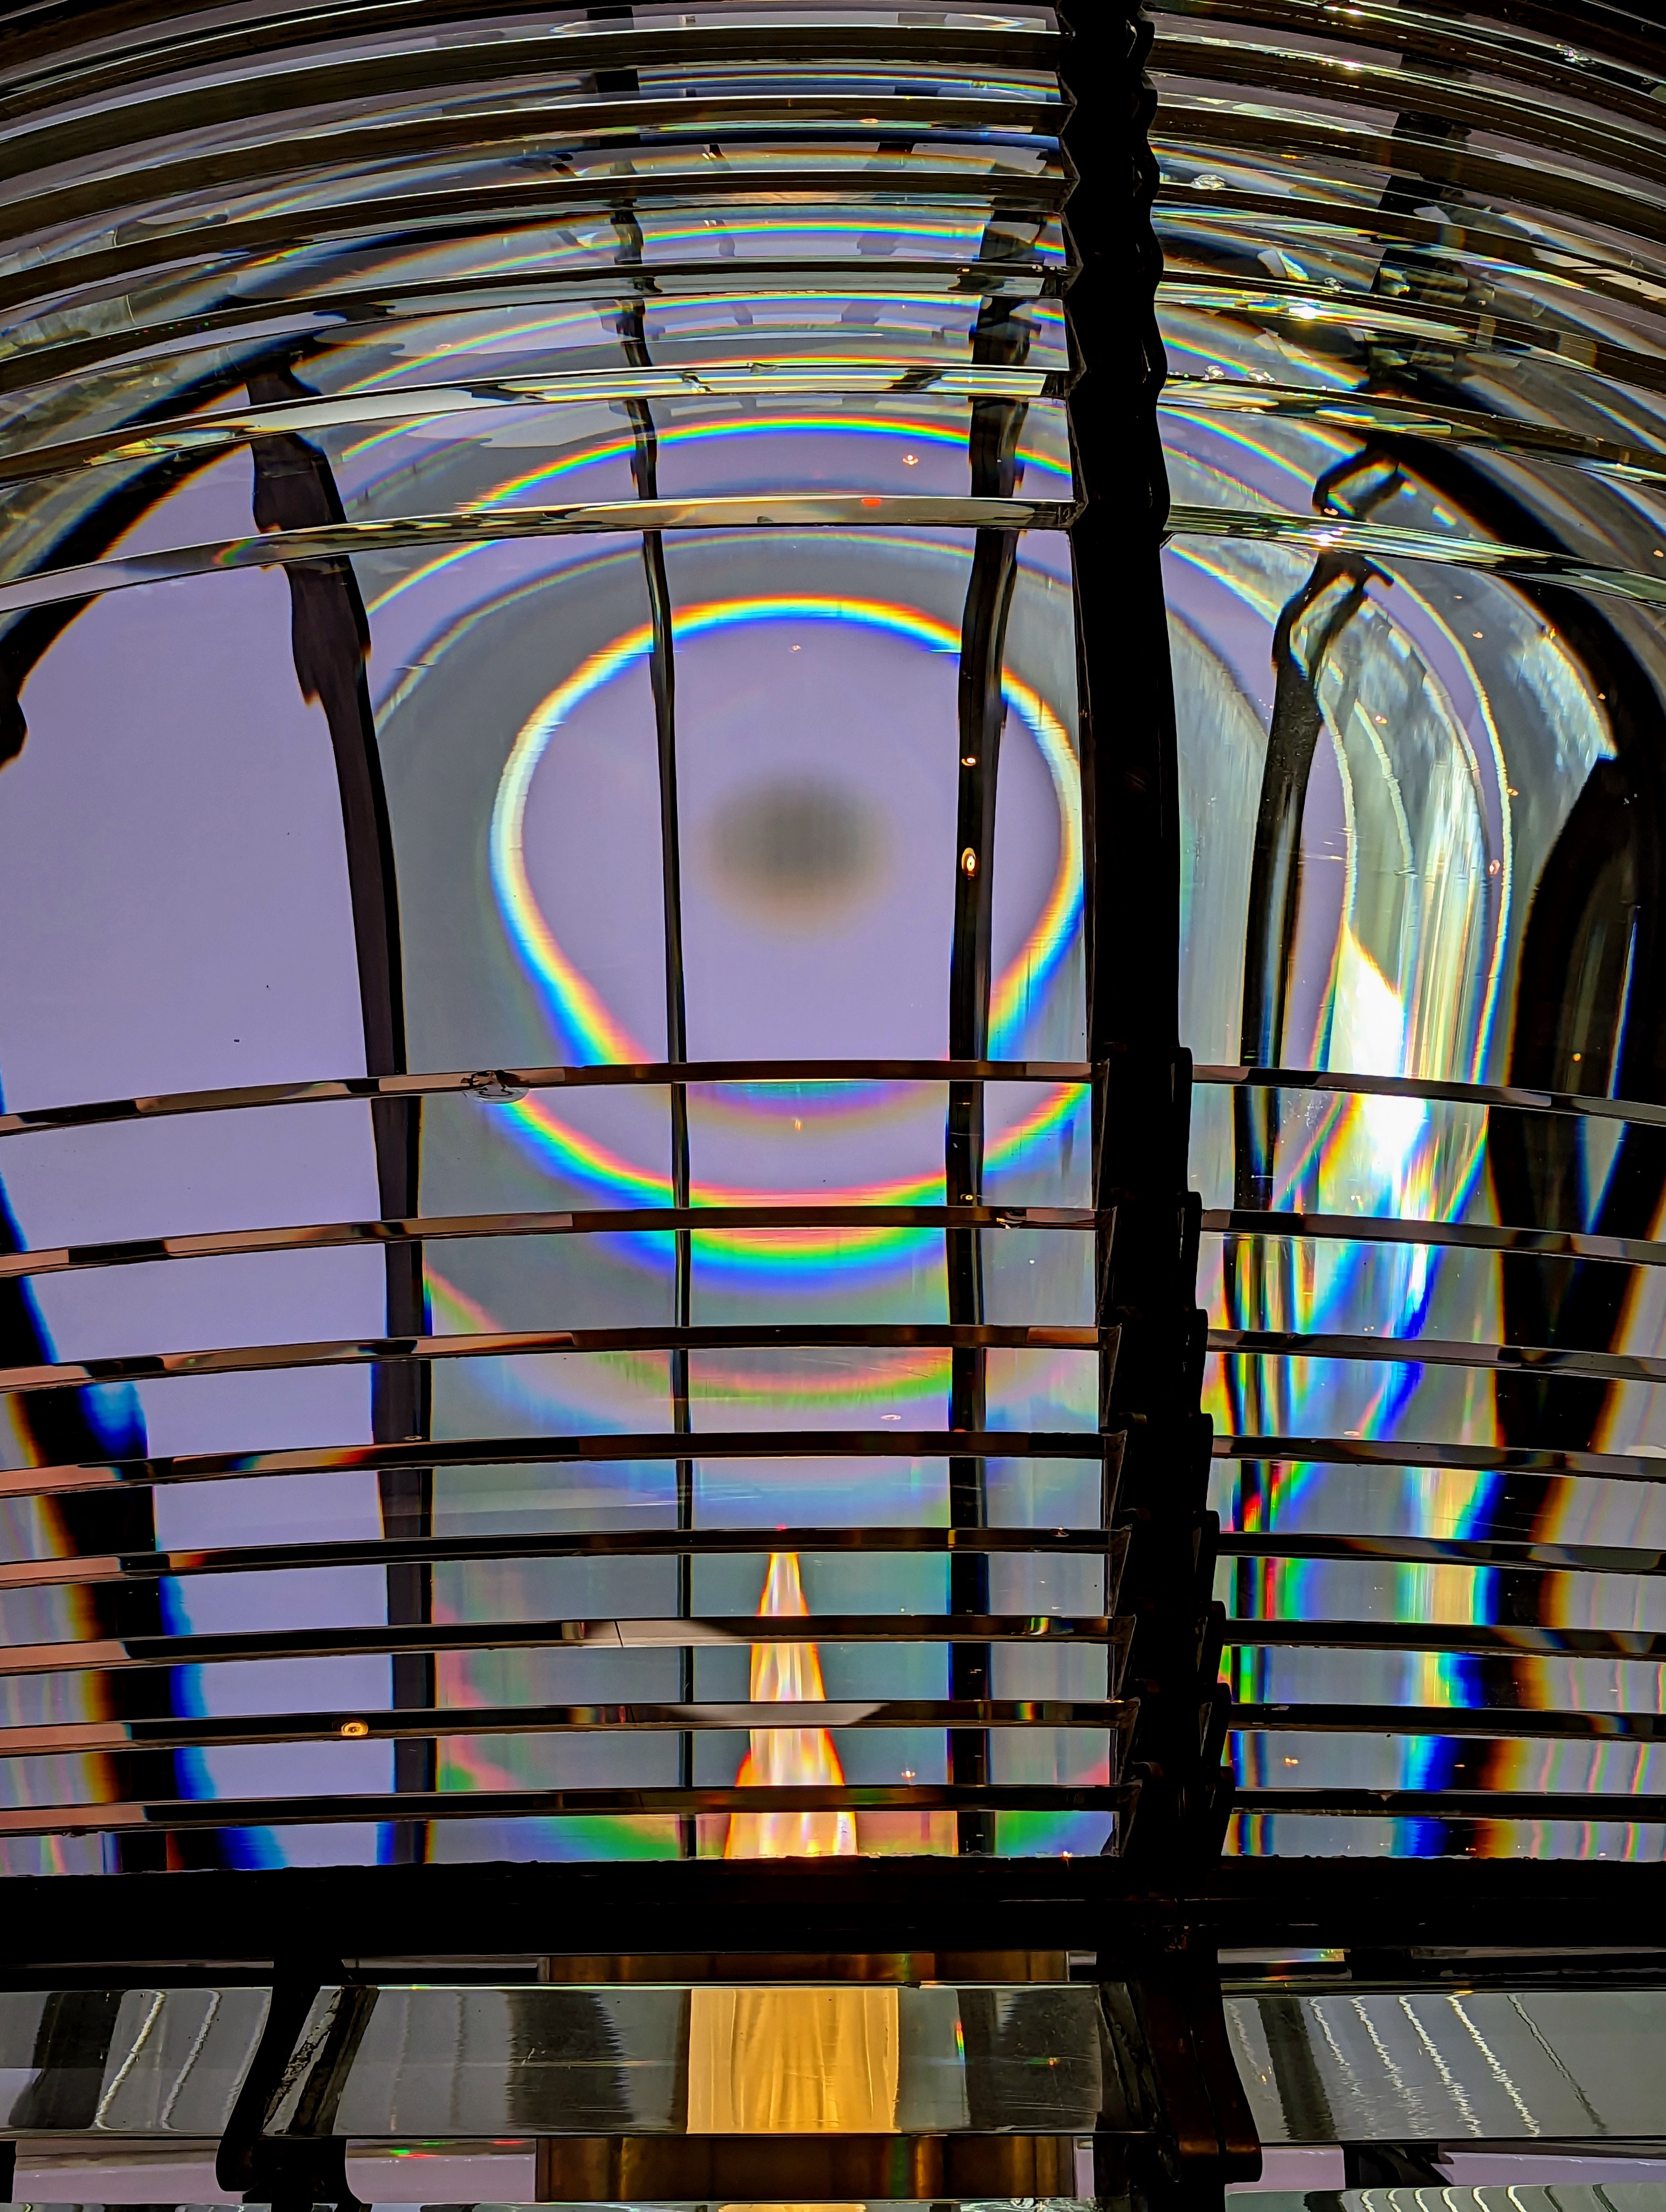 sunlight creating rainbows within an old lighthouse lamp and lens